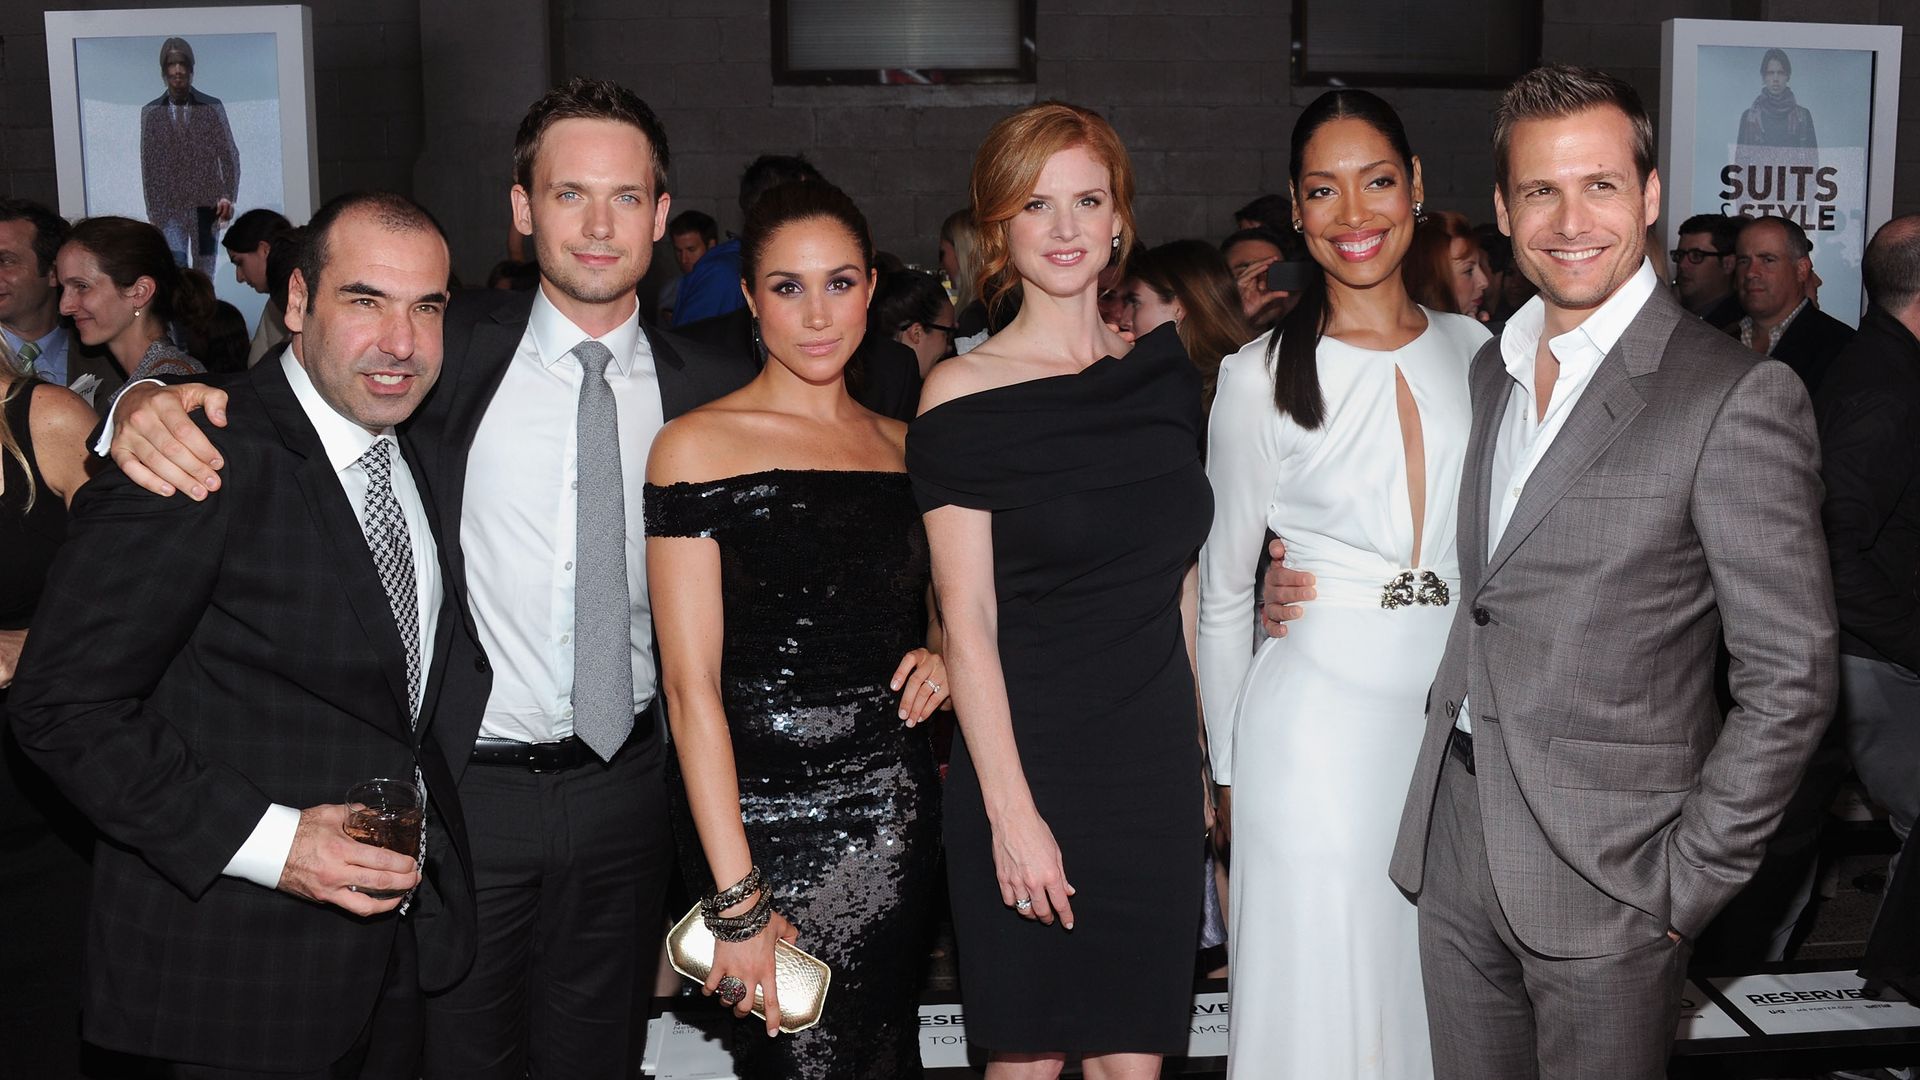 Meghan and the cast of Suits became good friends from the beginning, pictured here back in 2012, a year after the series launched